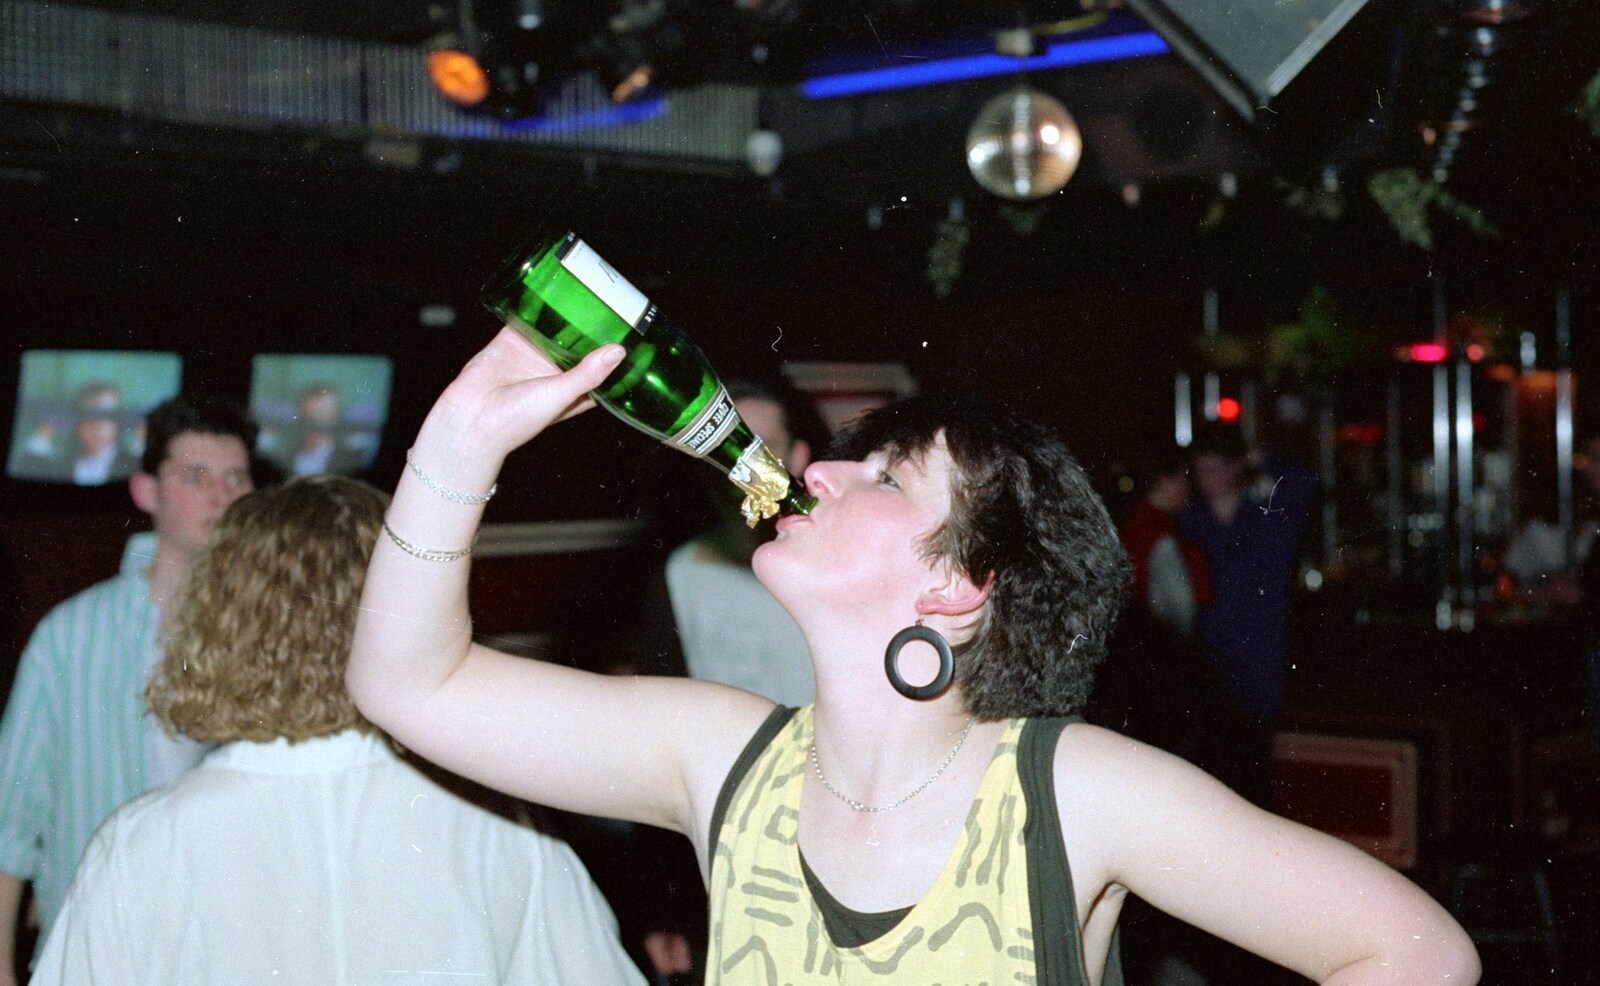 Swigging from the bottle of fizz from Uni: A Party in Snobs Nightclub, Mayflower Street, Plymouth - 18th October 1986